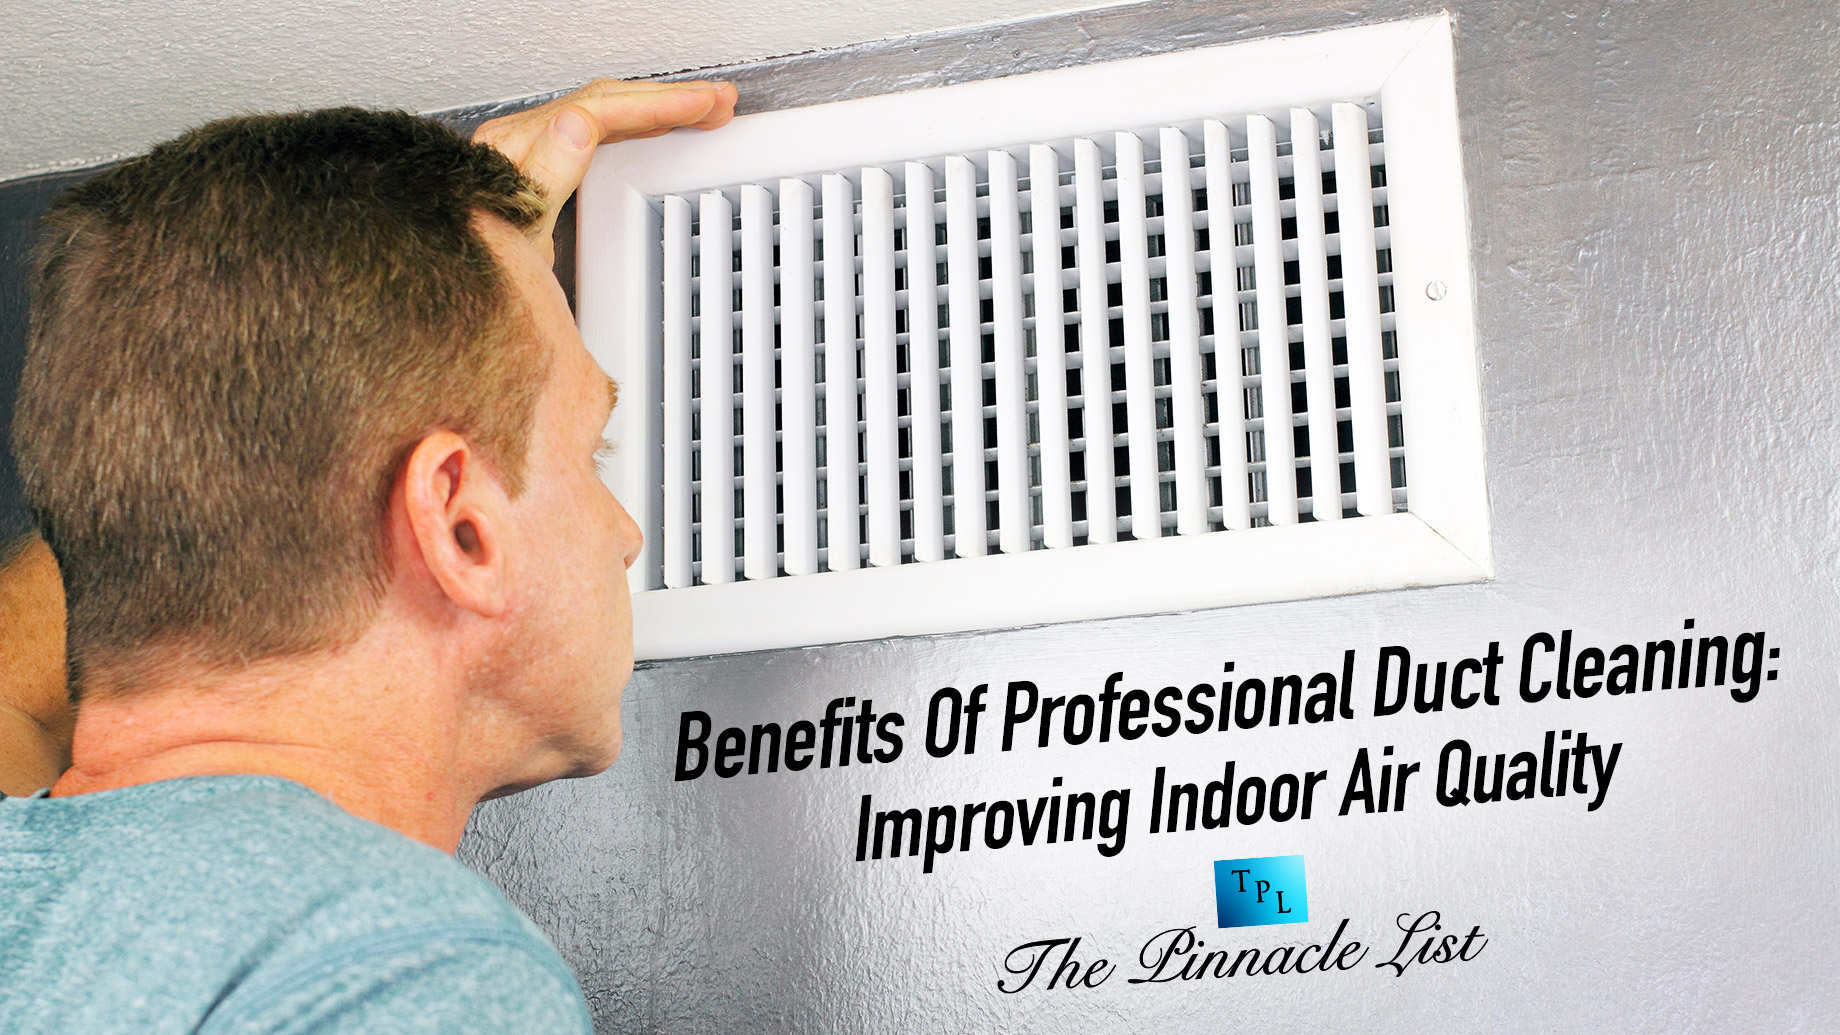 The Benefits Of Professional Duct Cleaning: Improving Indoor Air Quality